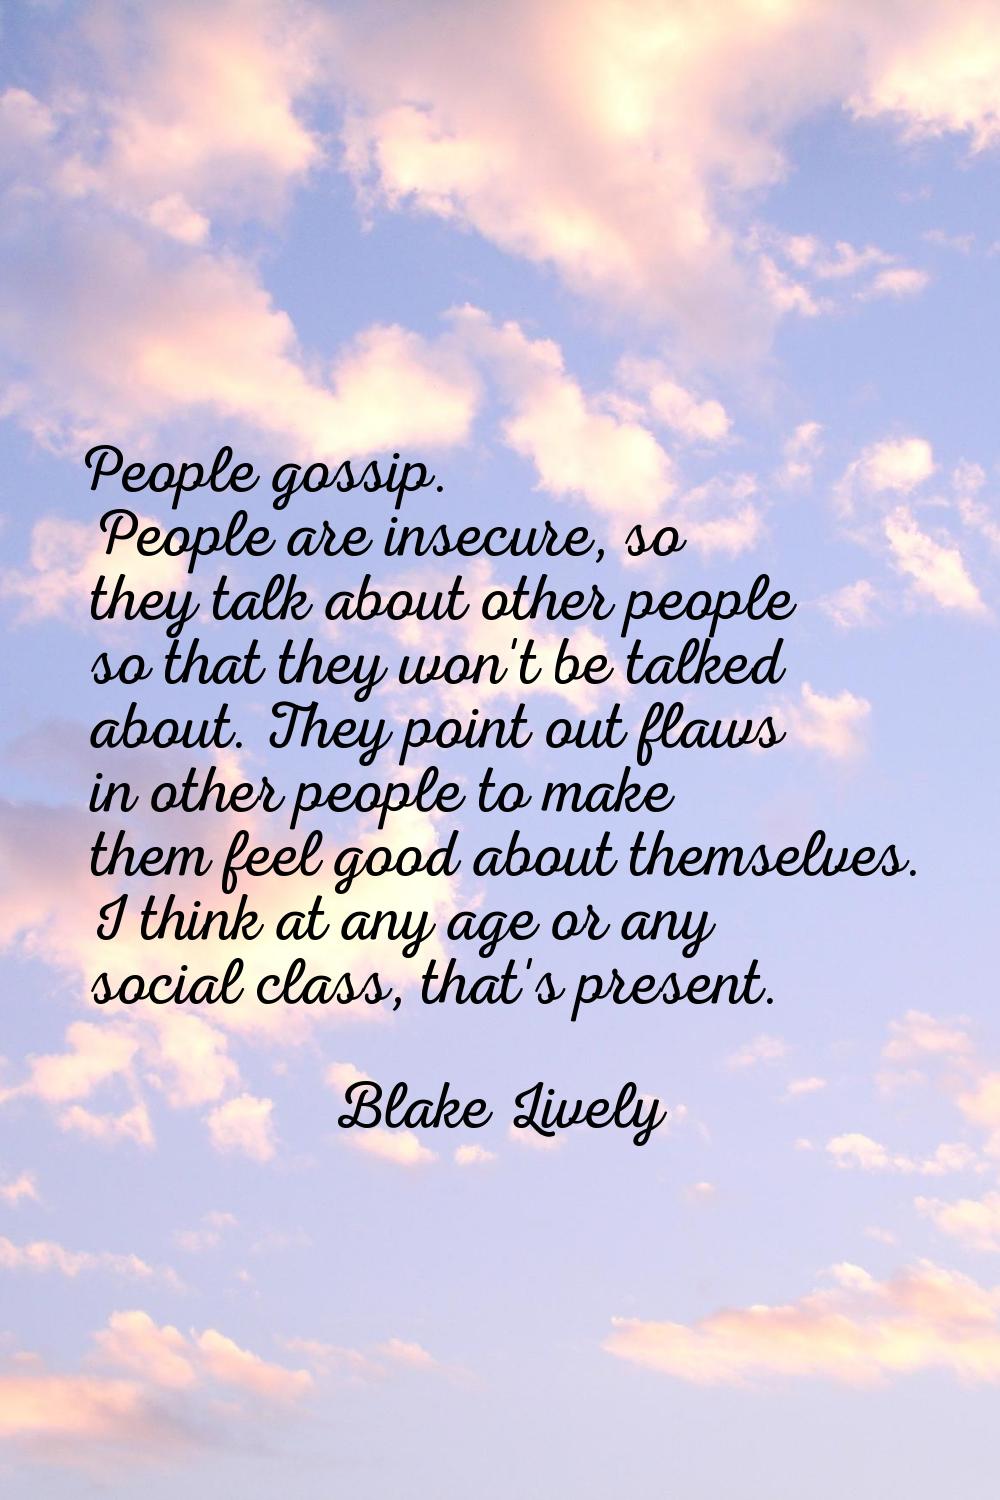 People gossip. People are insecure, so they talk about other people so that they won't be talked ab